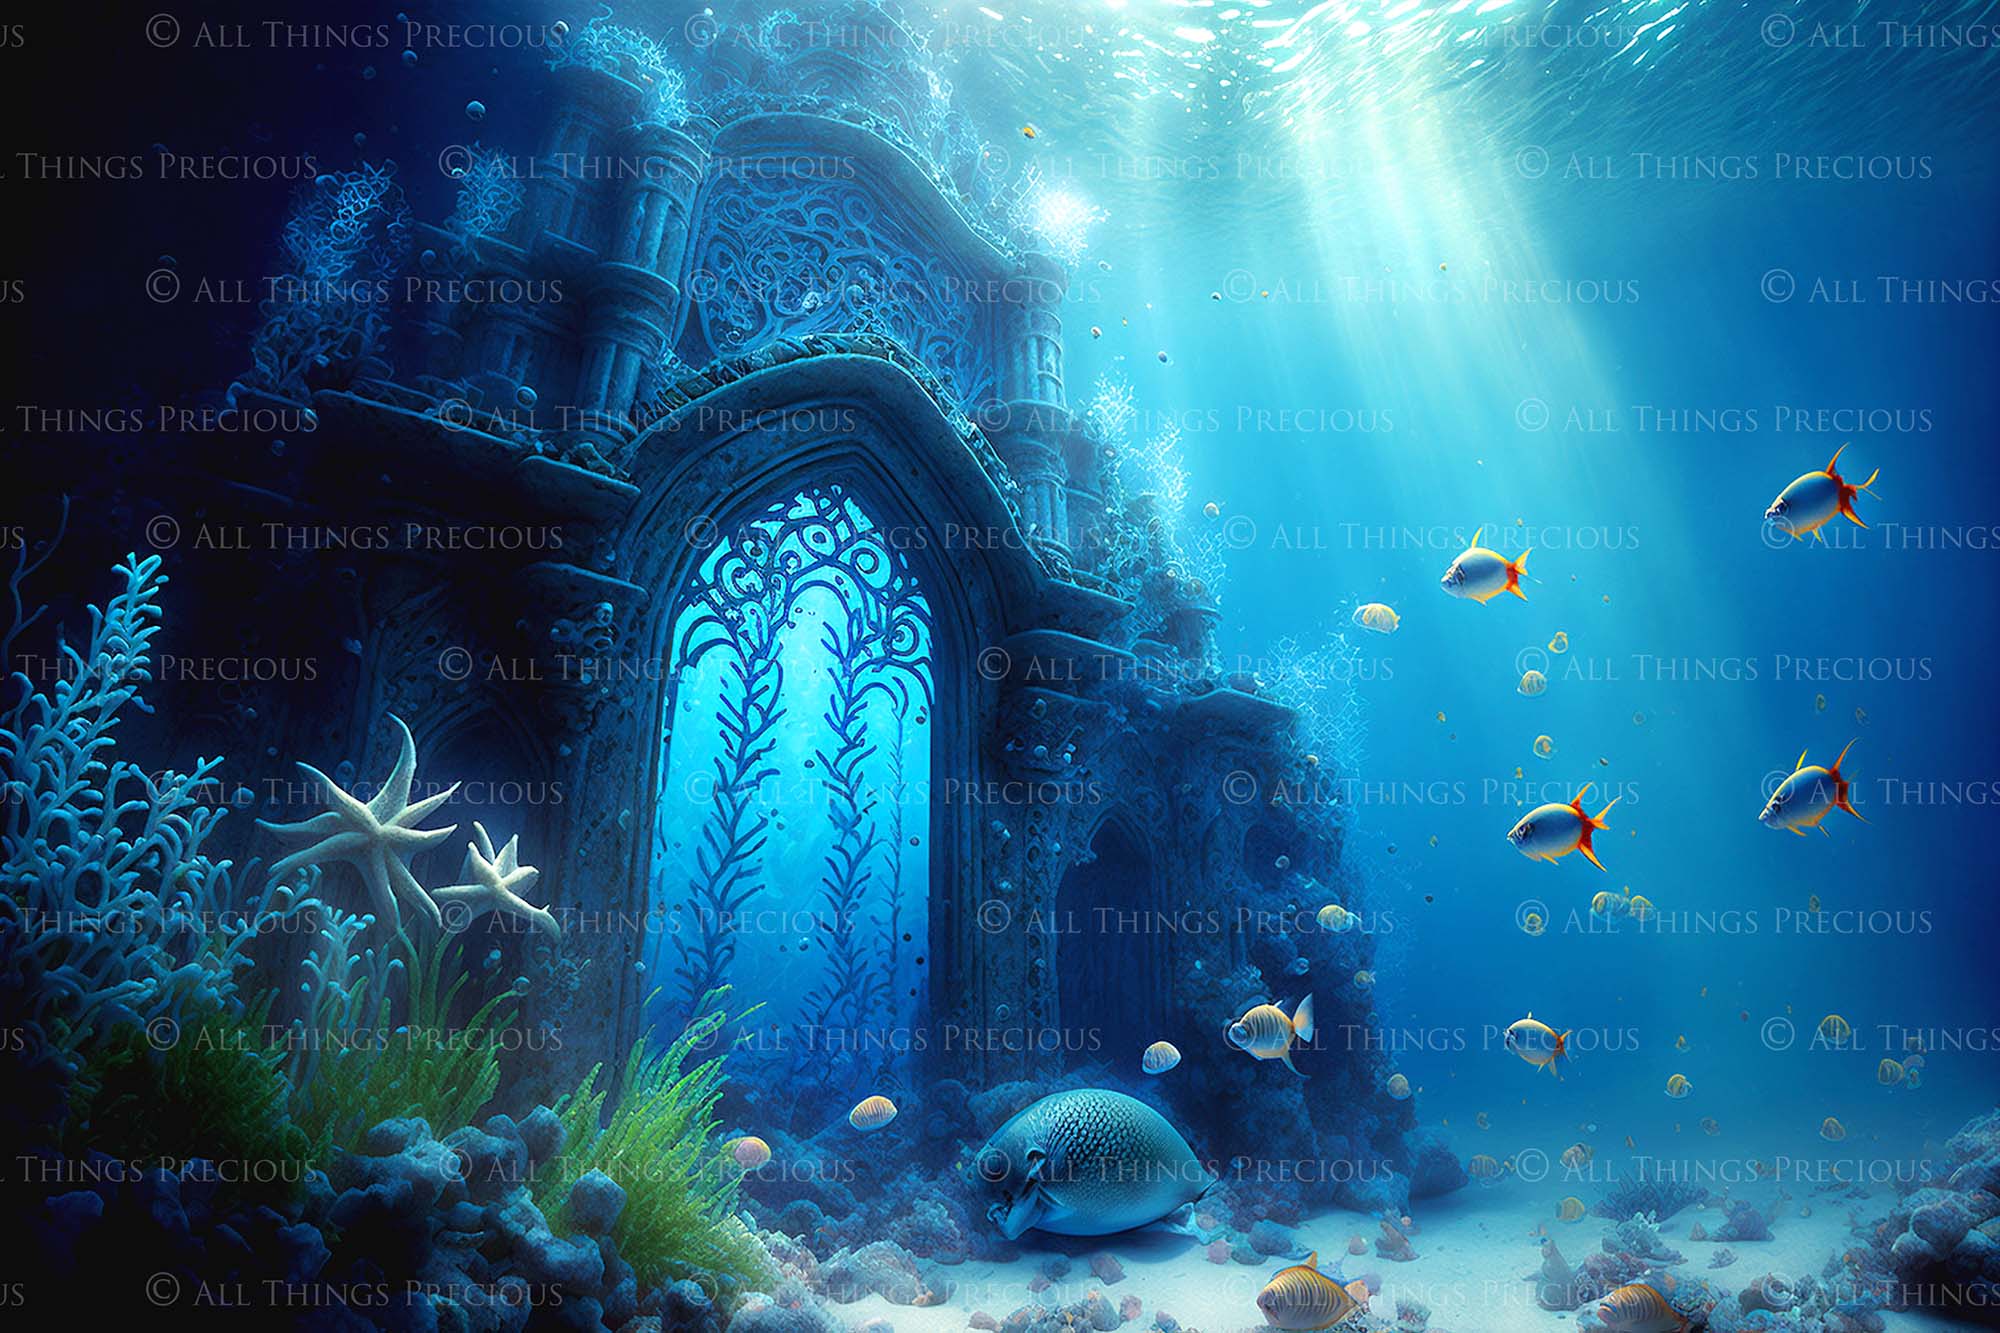 Underwater digital background. For Photography, mermaid edits, Digital Scrapbooking or Print. High resolution, digital download file. Fish, Under water ruins and coral.